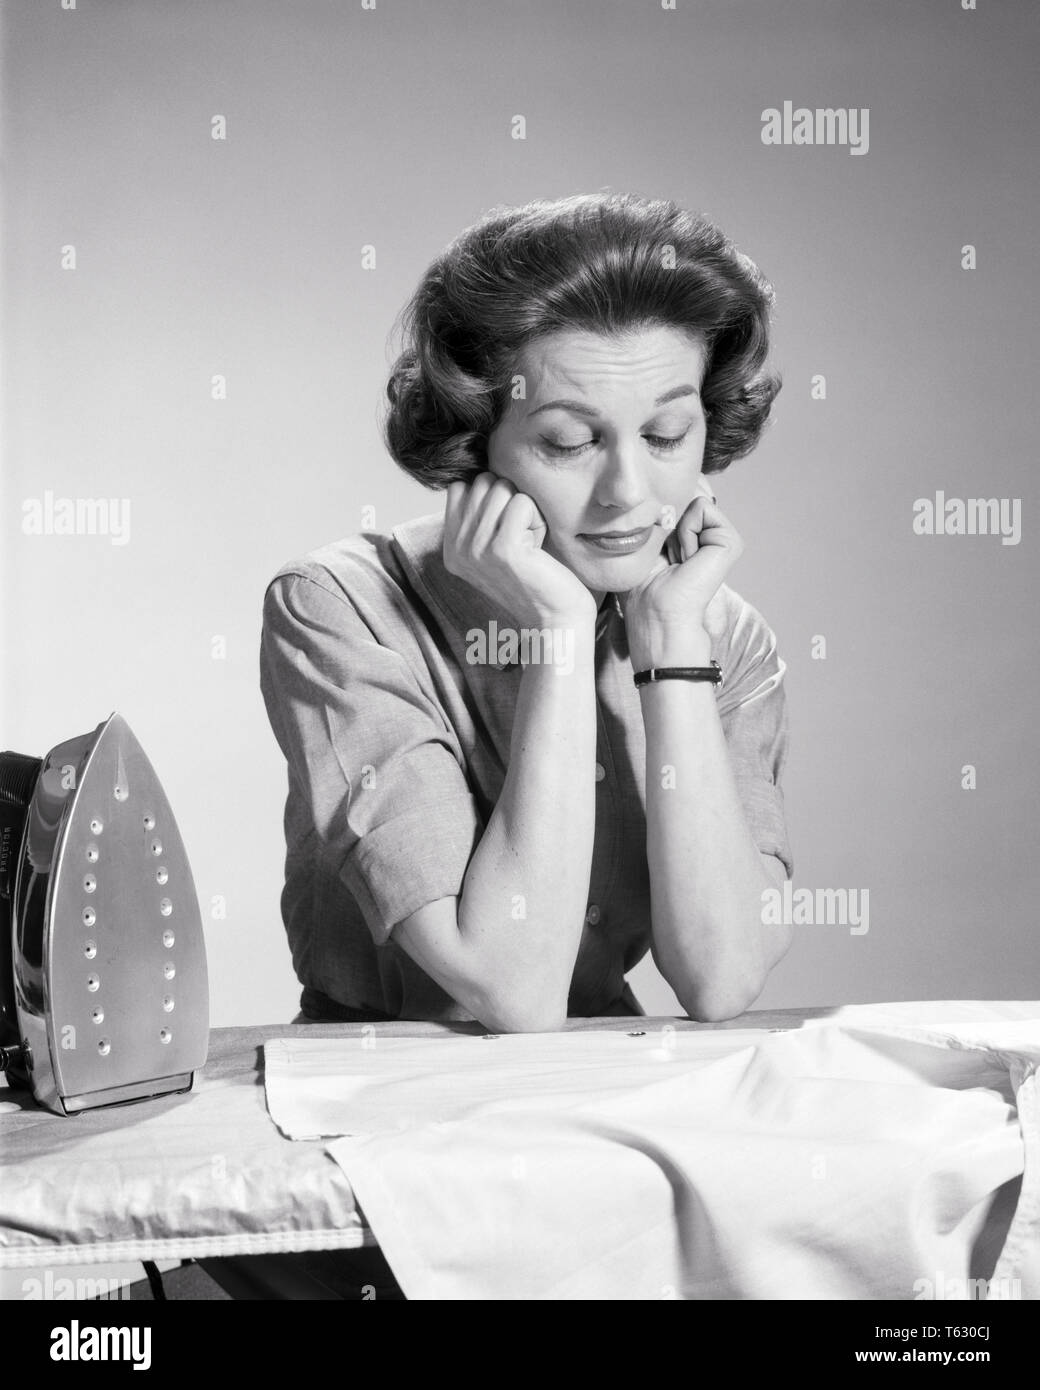 1960s TIRED HOUSEWIFE RESTING HER HEAD ON HANDS  ELBOWS ON IRONING BOARD TAKING A BREAK FROM IRONING EYES CLOSED   - s11592 HAR001 HARS STUDIO SHOT MOODY RURAL HOME LIFE WRISTWATCH COPY SPACE HALF-LENGTH LADIES PERSONS CARING TROUBLED B&W BREAK RESTING SADNESS BRUNETTE HOMEMAKER OVERWORKED HOMEMAKERS CHORE NAPPING HOUSEWIVES MOOD OCCUPATIONS ELBOWS TASKS CONCEPTUAL GLUM MID-ADULT MAN MID-ADULT WOMAN MISERABLE NAP RELAXATION STEAM IRON BLACK AND WHITE BOREDOM CAUCASIAN ETHNICITY HAR001 OLD FASHIONED TIREDNESS WEARY Stock Photo